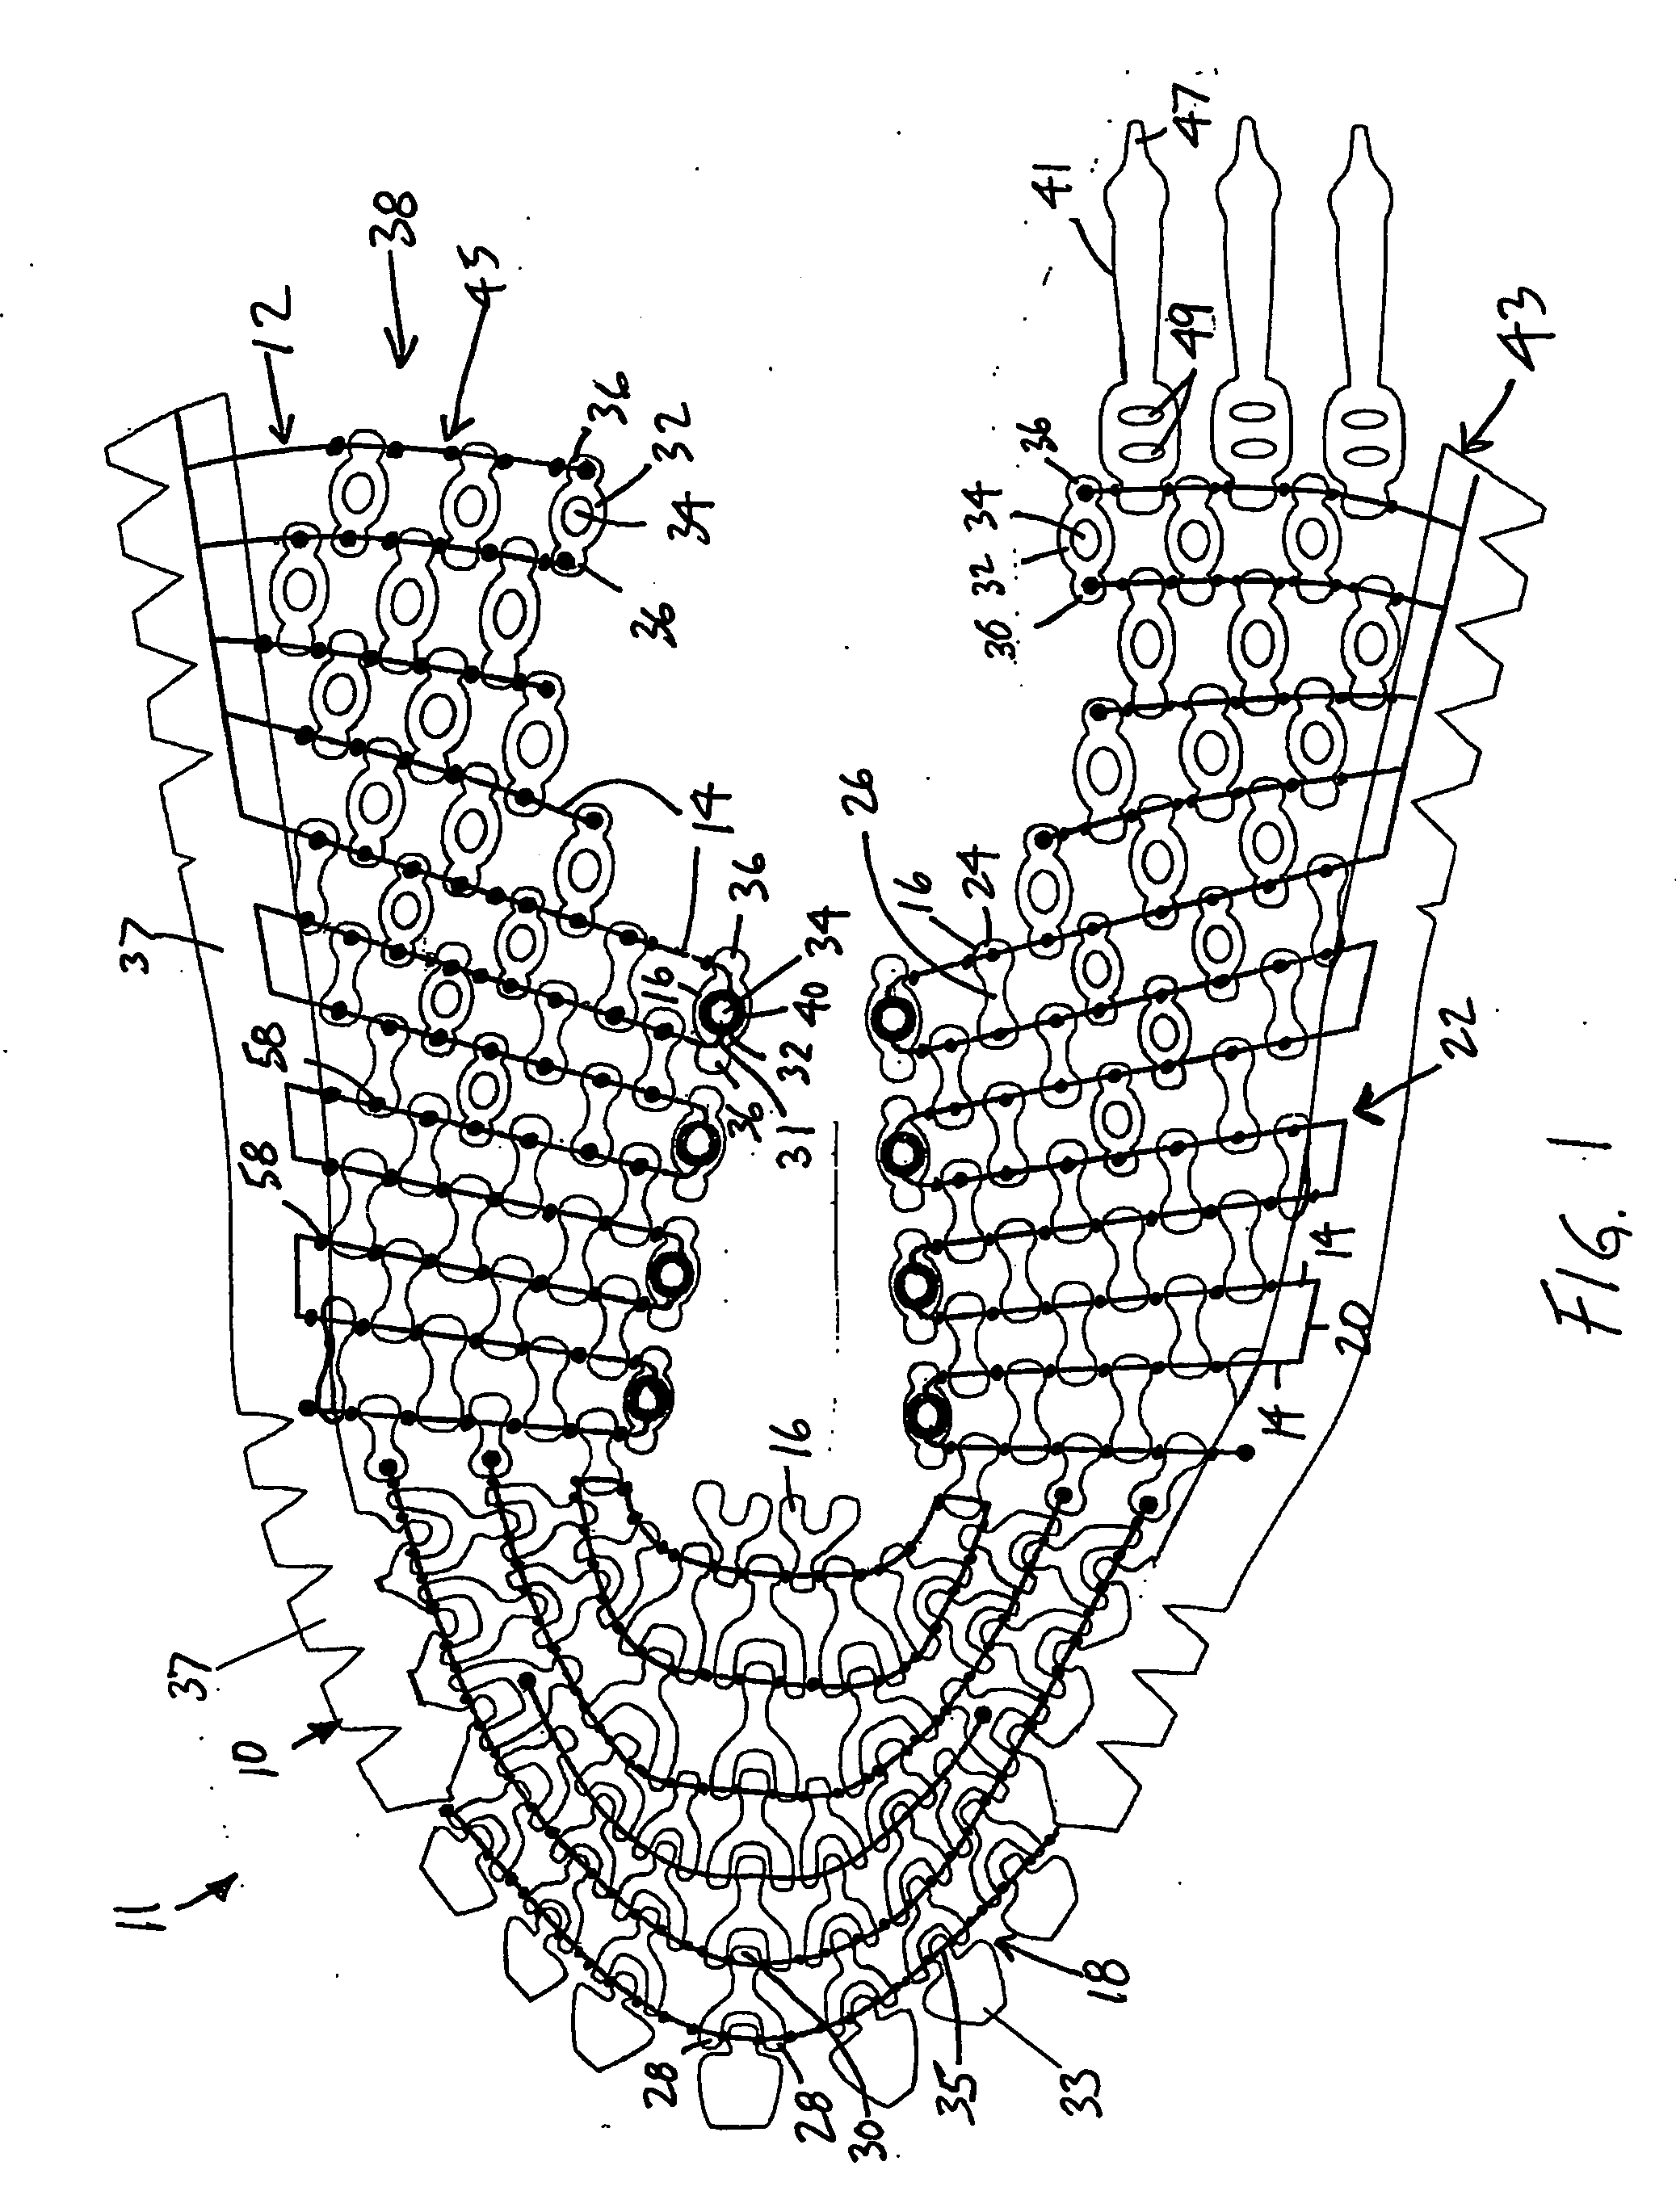 Material formed of multiple links and method of forming same